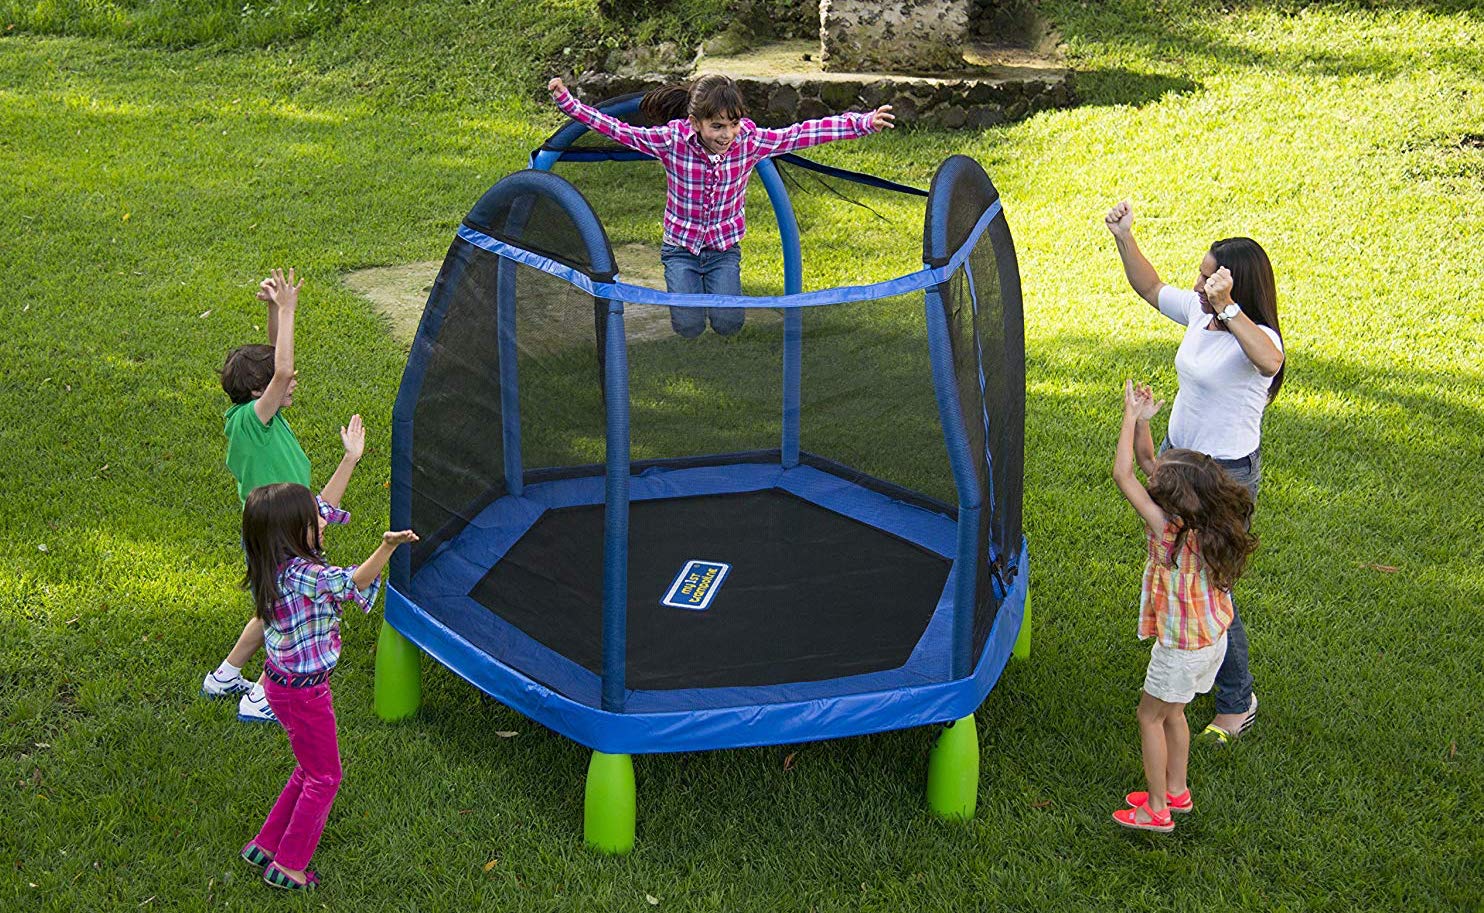 Top 10 Best Small Trampoline with Net Review